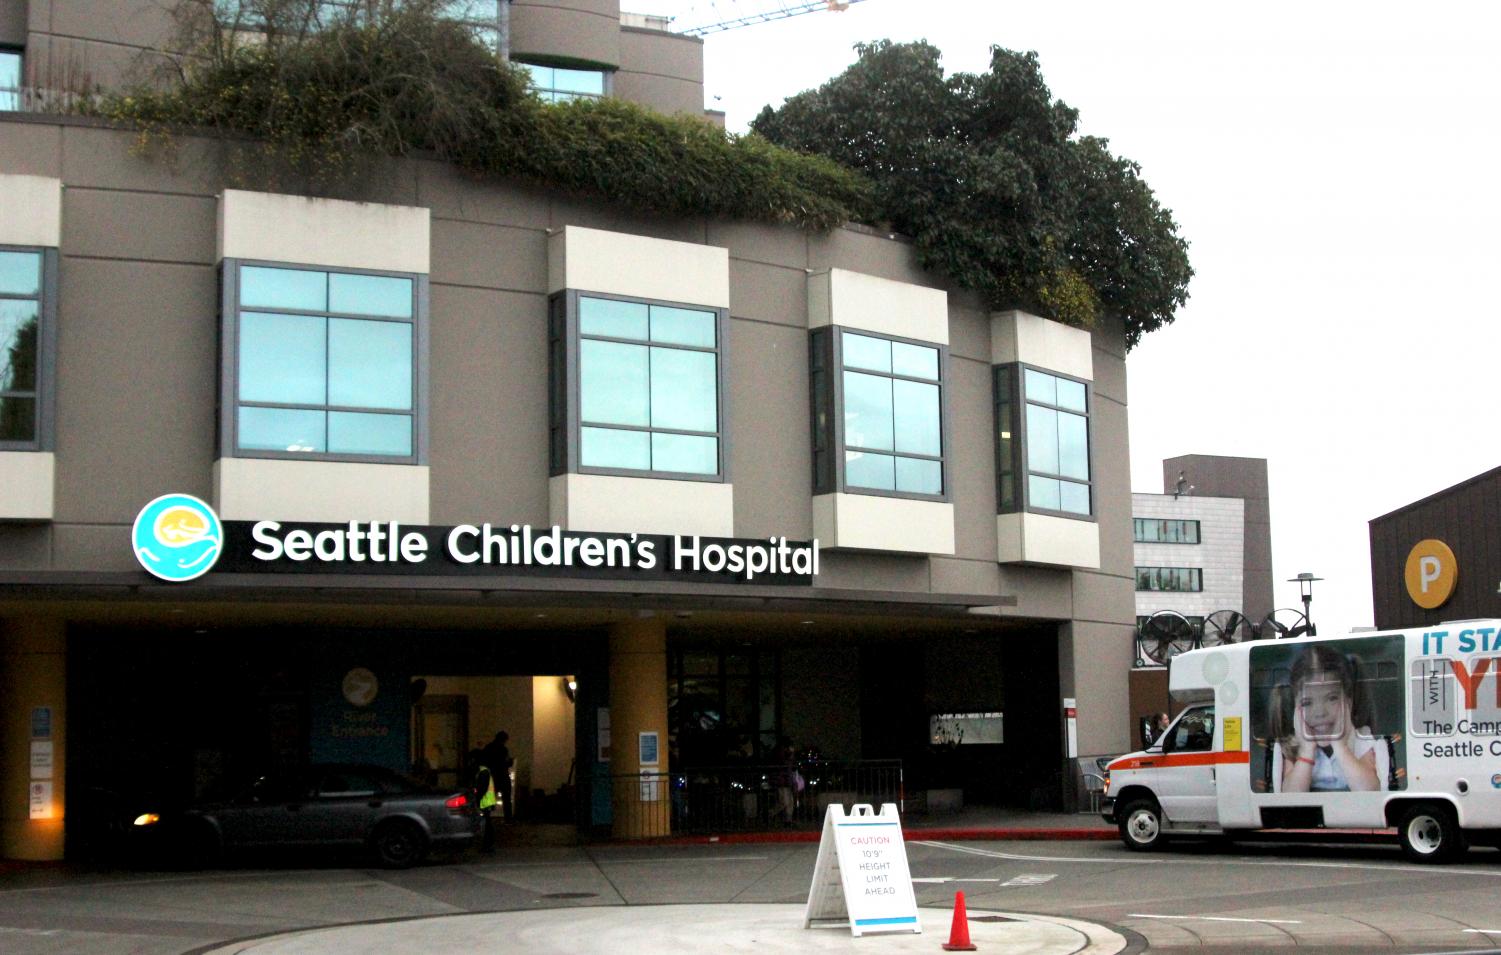 The+emergency+room+at+Seattle+Children%E2%80%99s+Hospital+in+Seattle.+The+hospital+plans+to+return+to+safe+operating+standards.+Photo+by+Mia%0ATavares